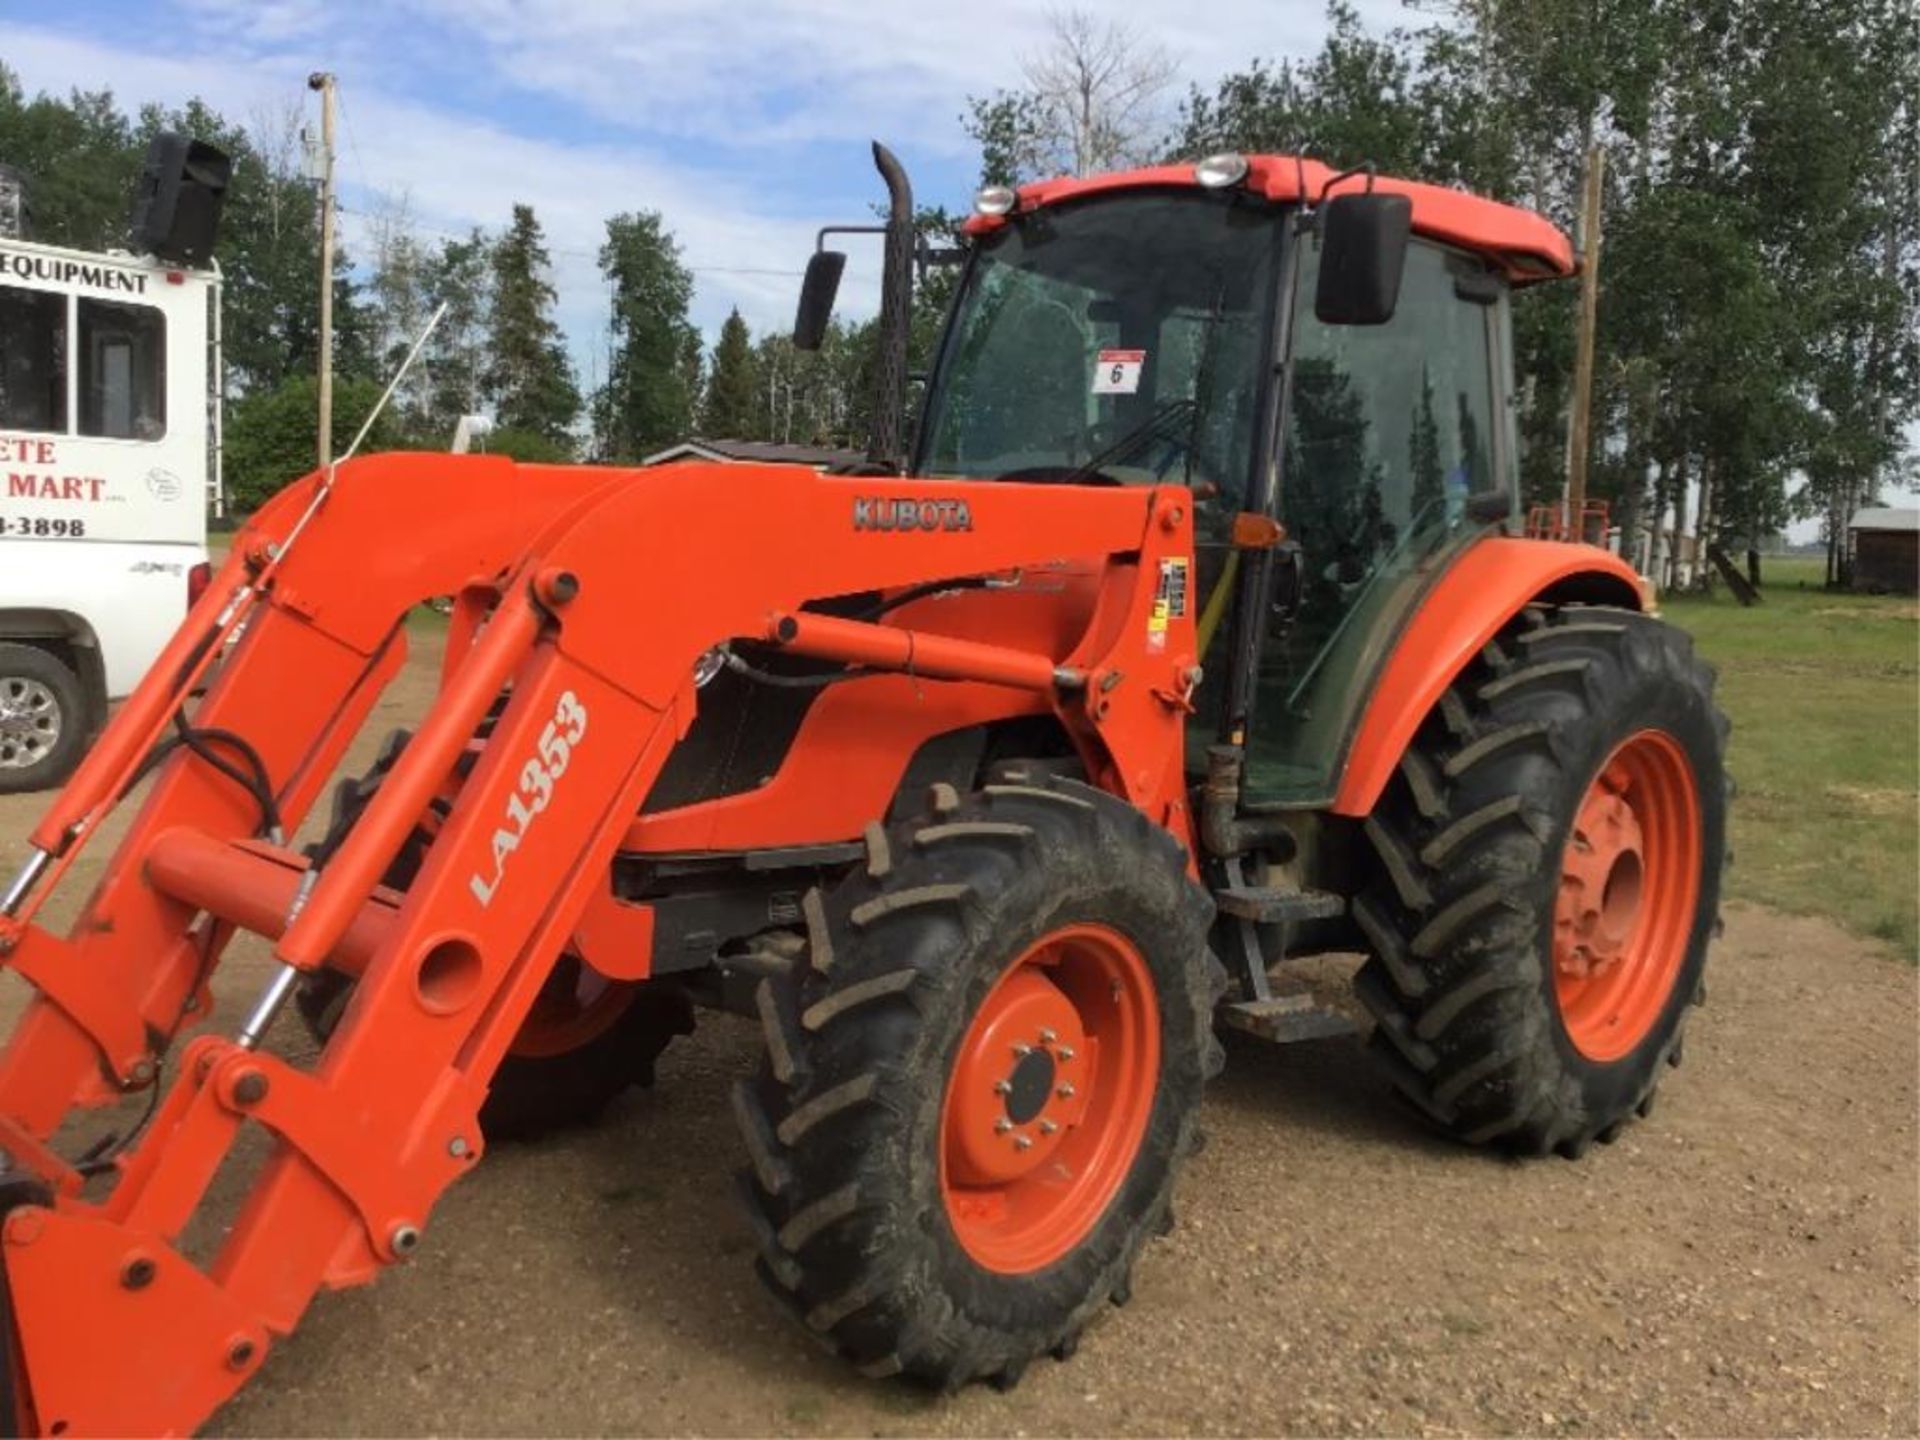 2011 M9540 Kubota Tractor W/ LA353 Front End Loader & Bucket, 2 Forks(may sell sepesrate), 1104